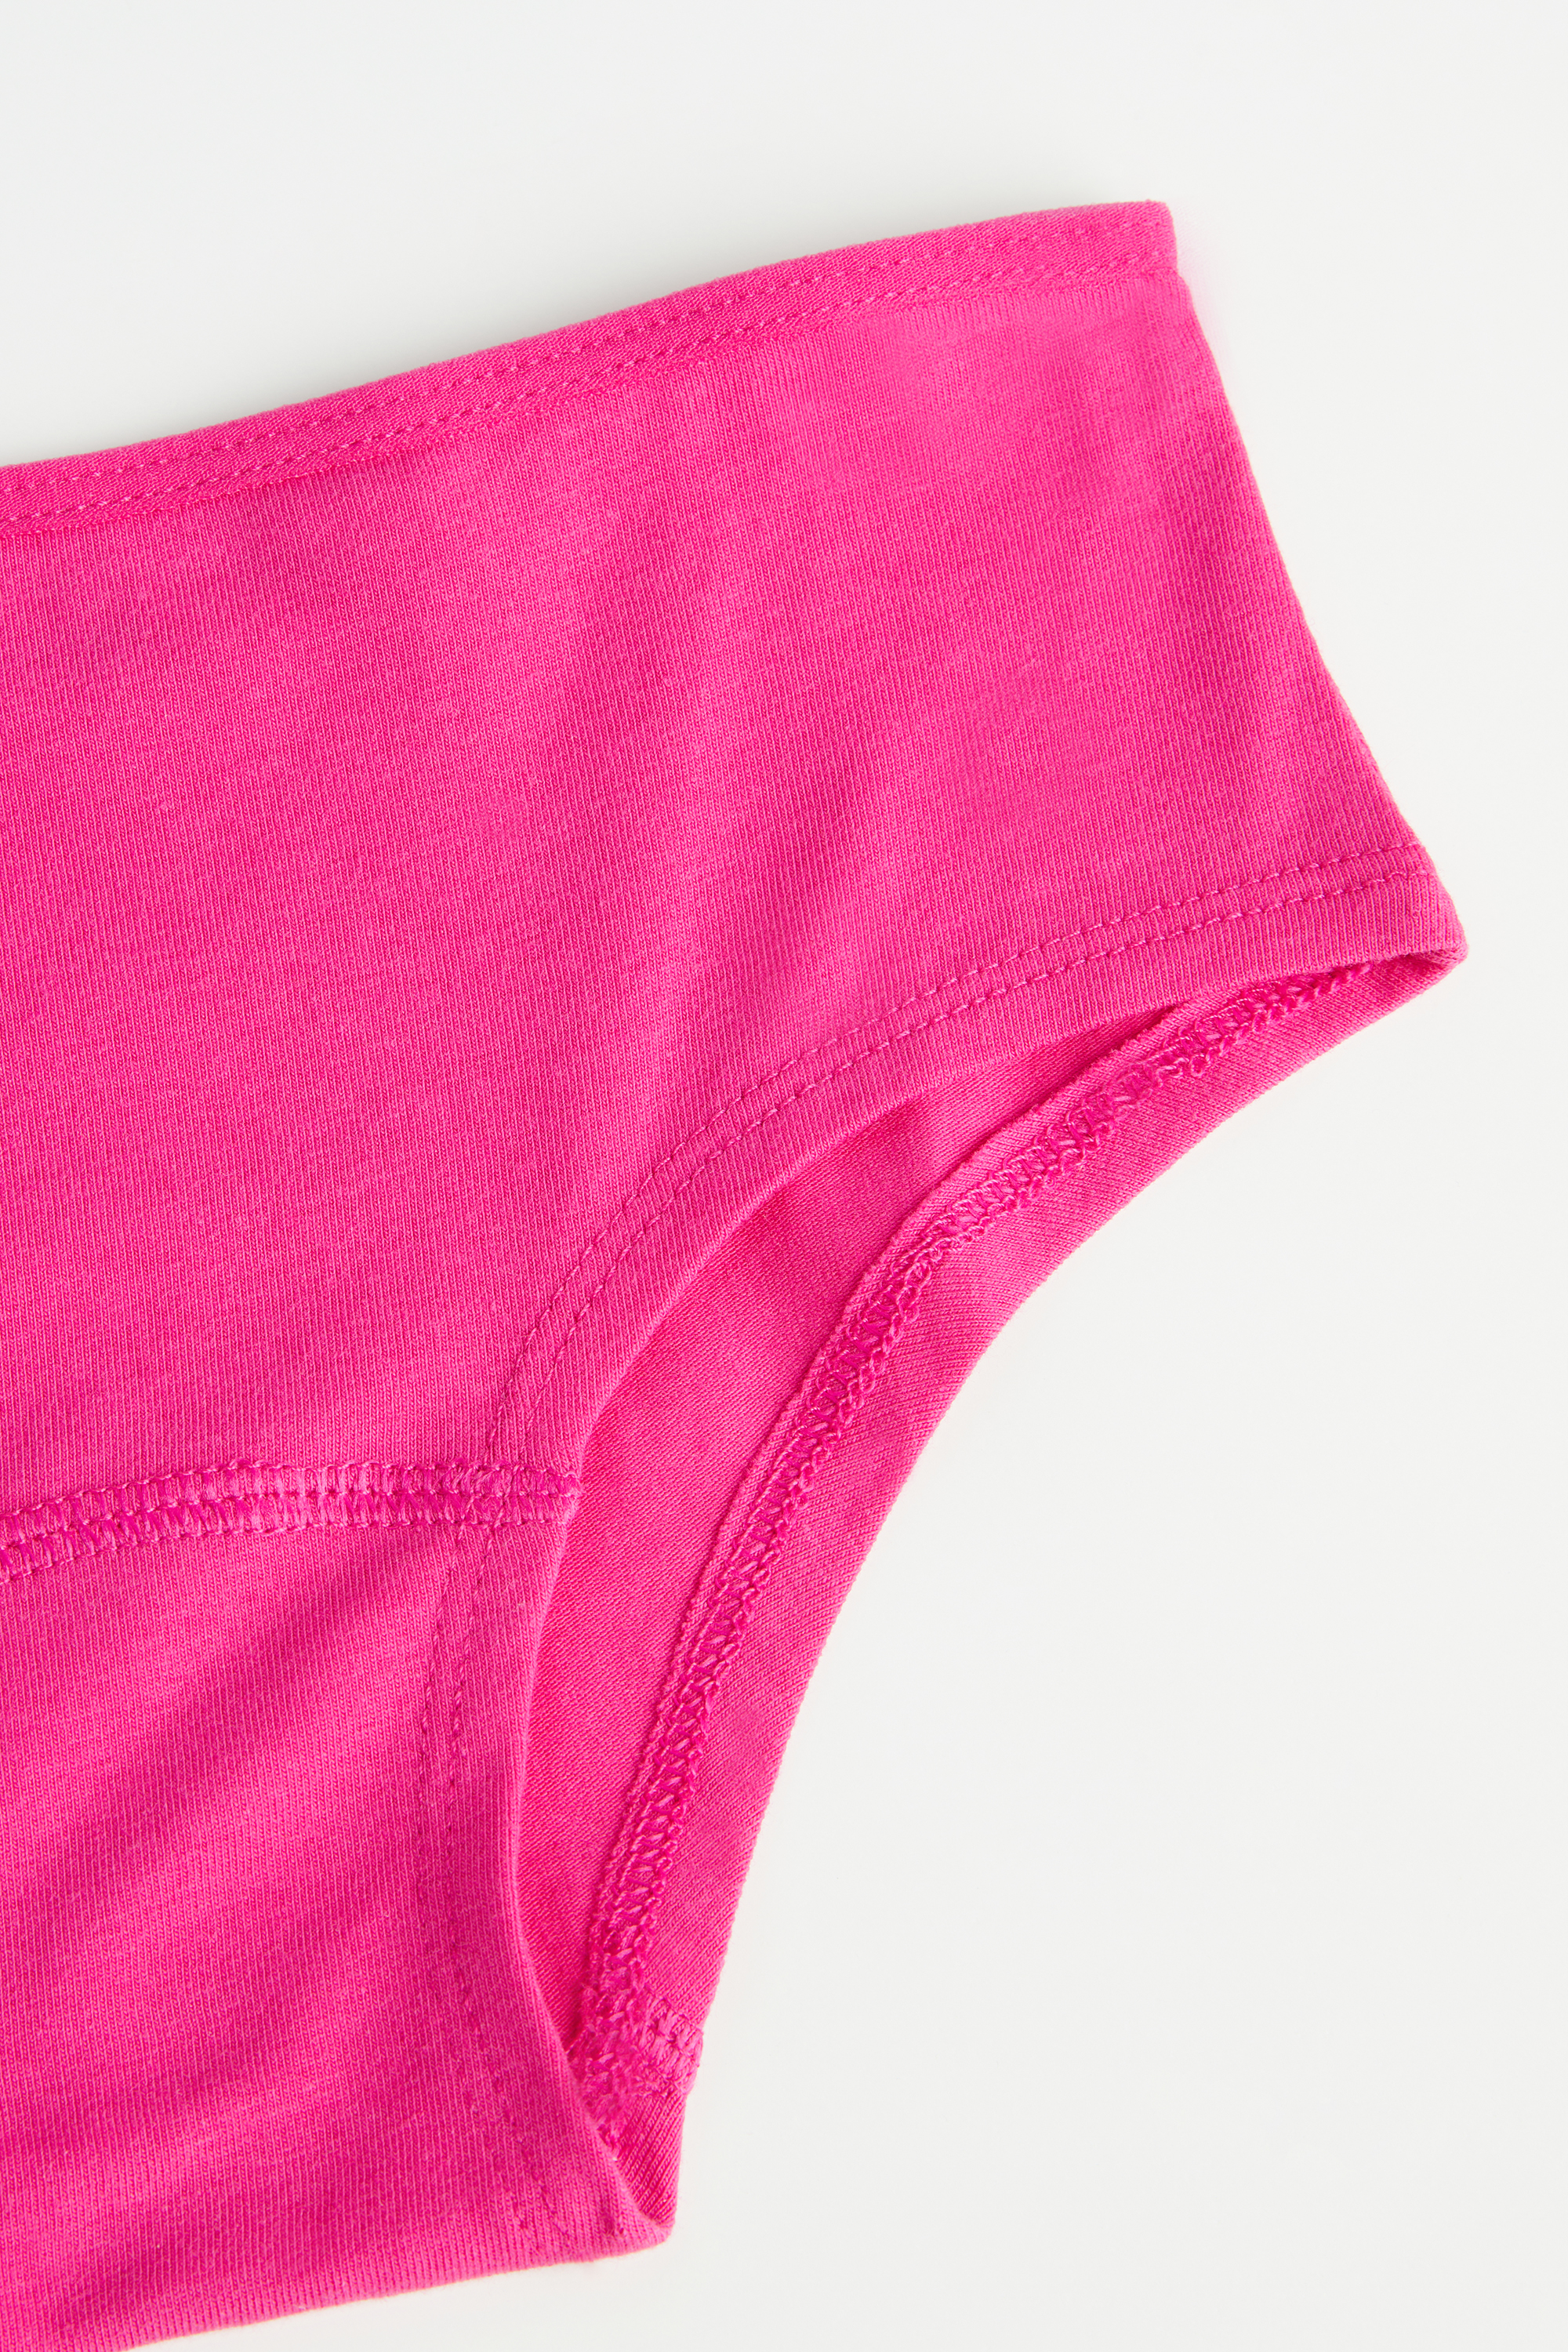 Girls’ Basic Cotton French Knickers